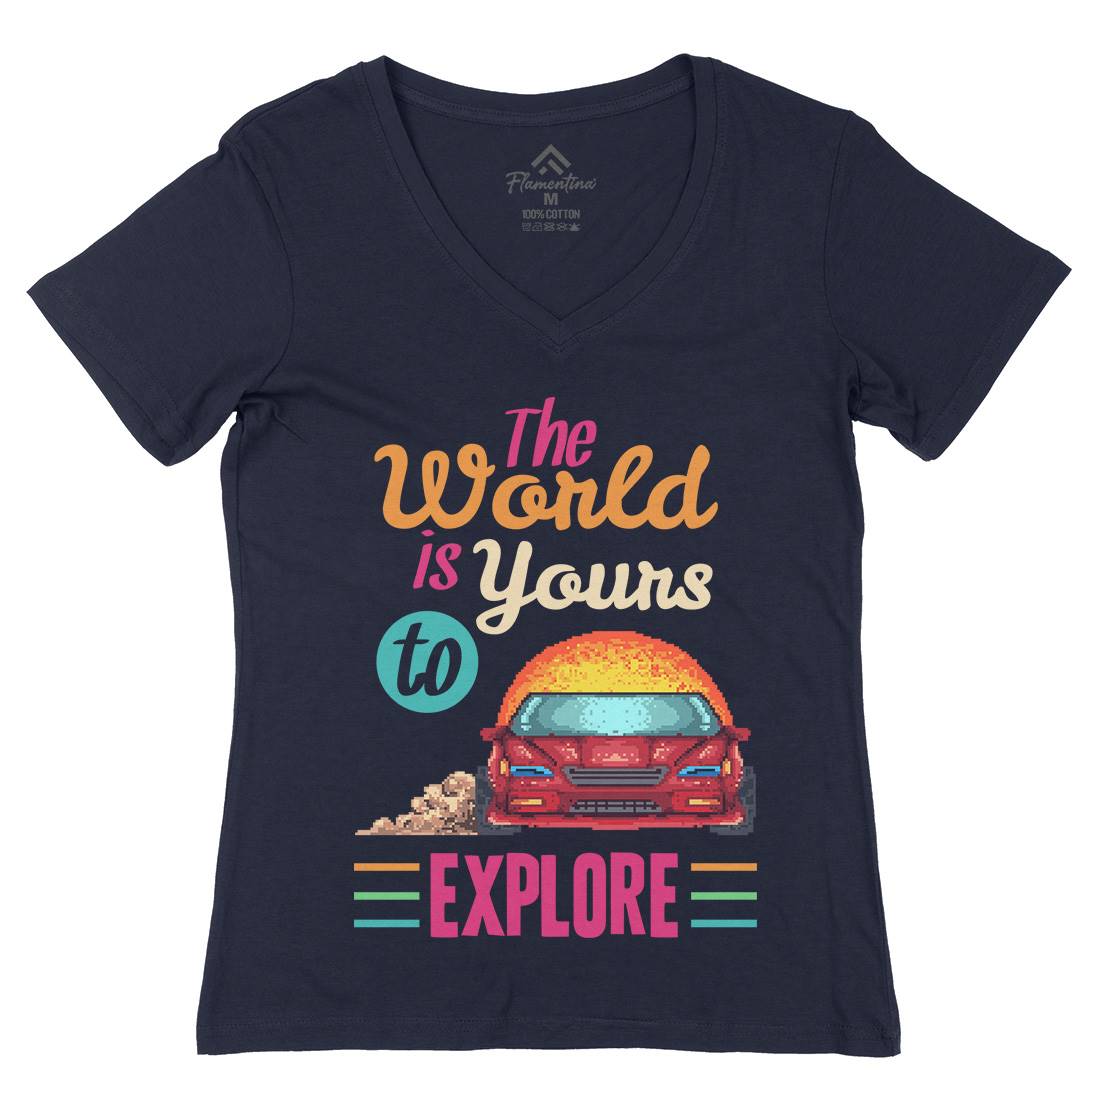 The World Is Yours To Explore Womens Organic V-Neck T-Shirt Cars B970